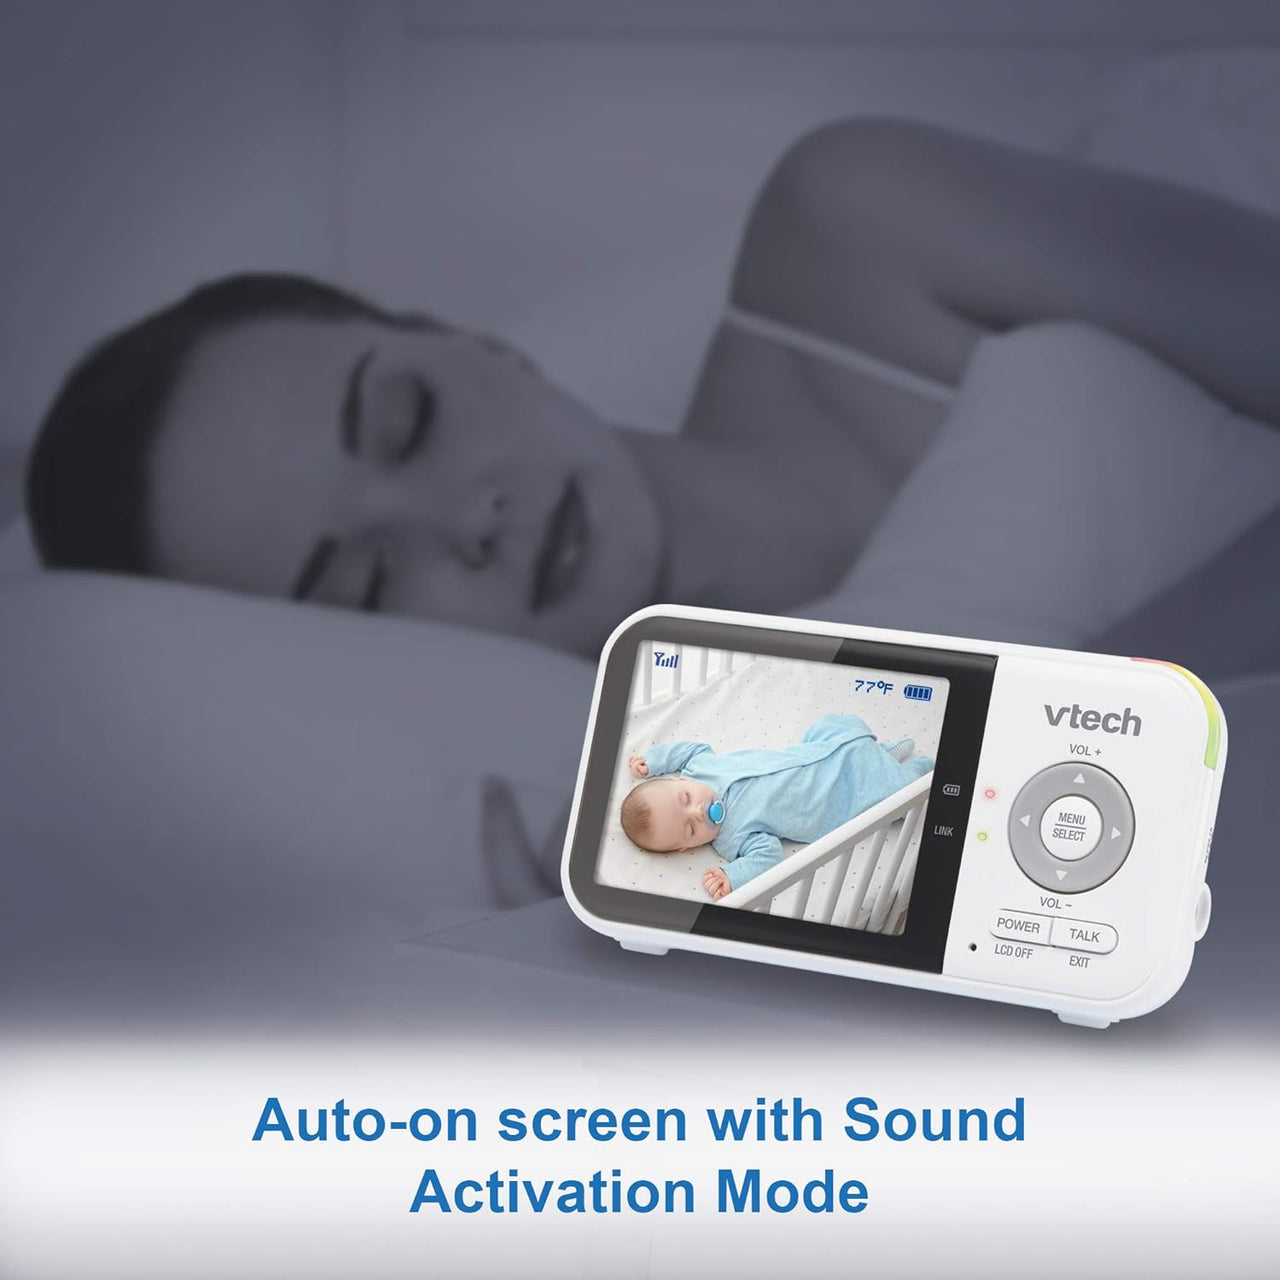 Vtech VM819 - Video Baby Monitor with Extended Battery Life